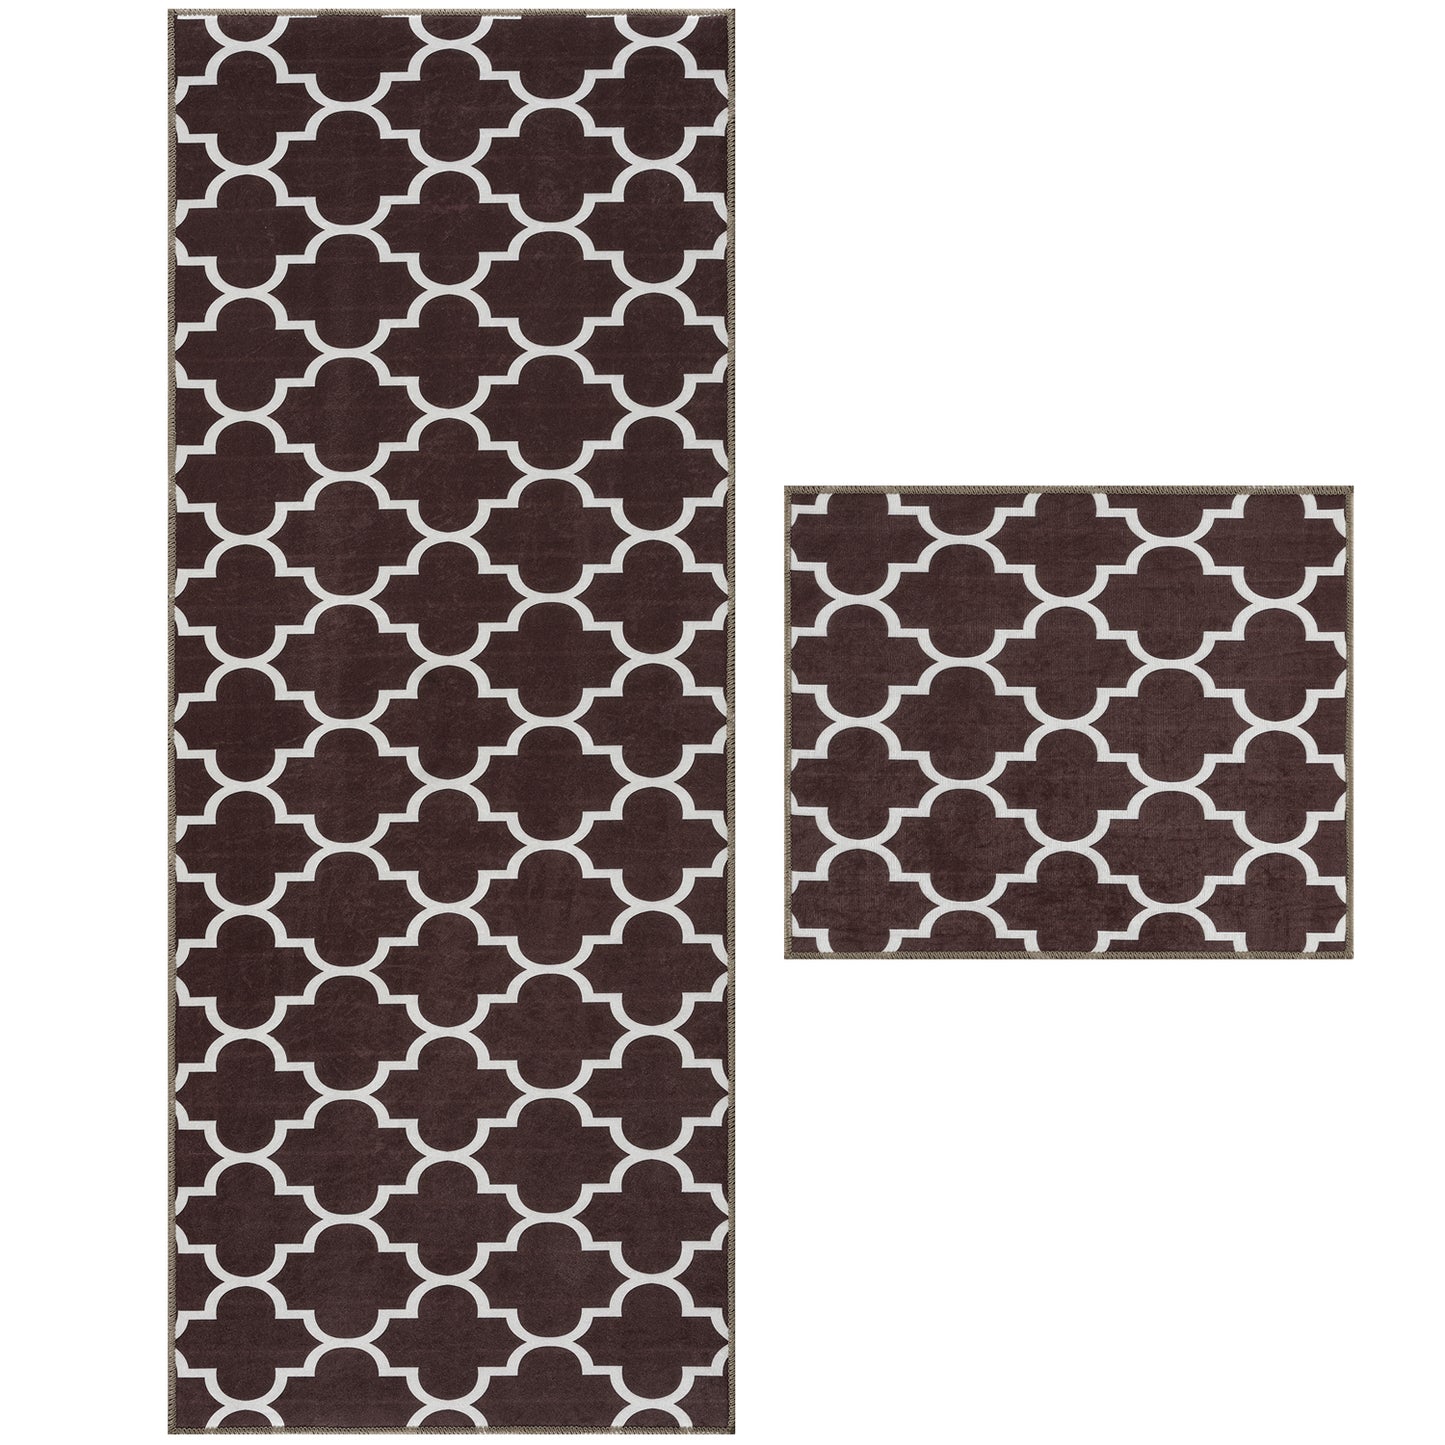 wunderlin Trellis Kitchen Runner Rugs Collection Non-Slip Kitchen Rugs Sets of Two